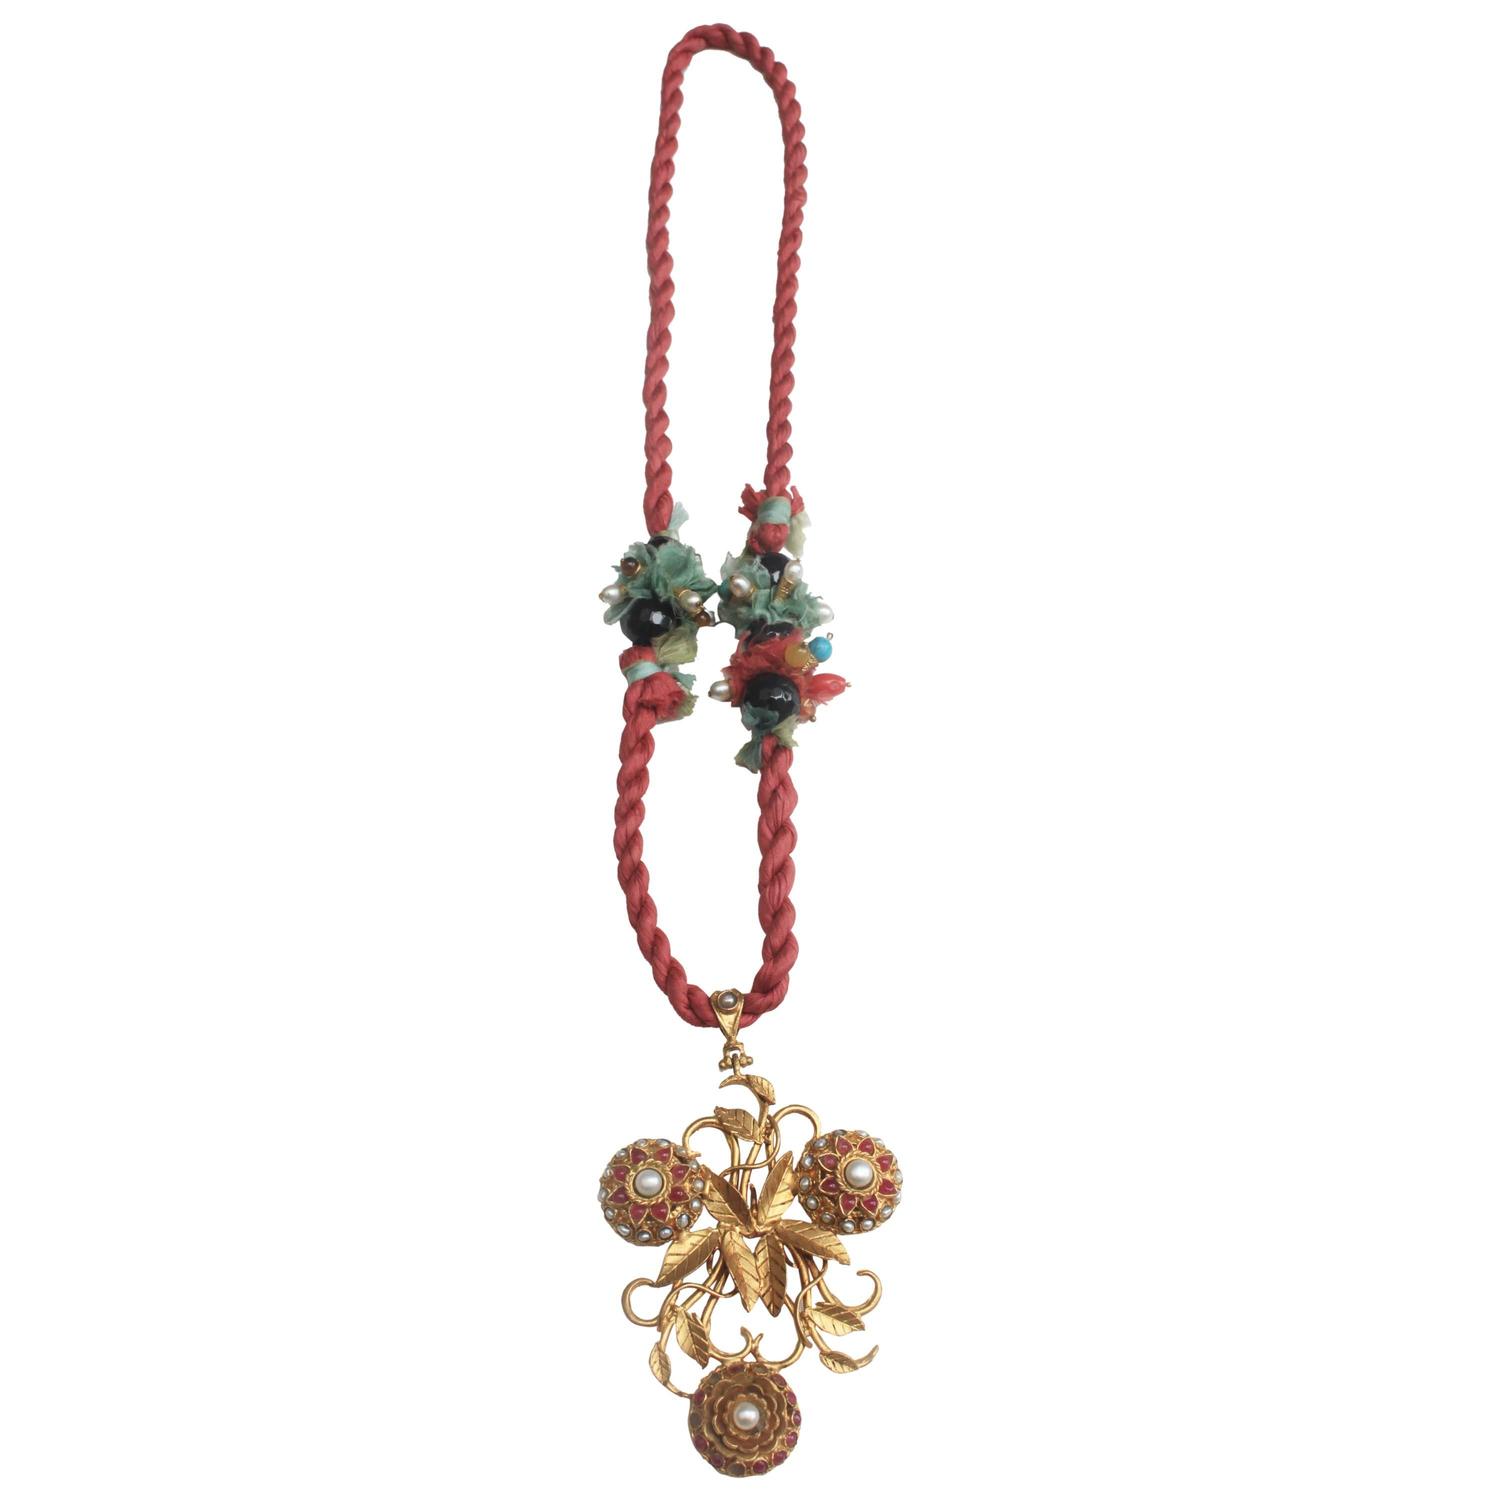 Unique Gold-Plated Pendant with Precious Stones from Afghanistan at 1stdibs